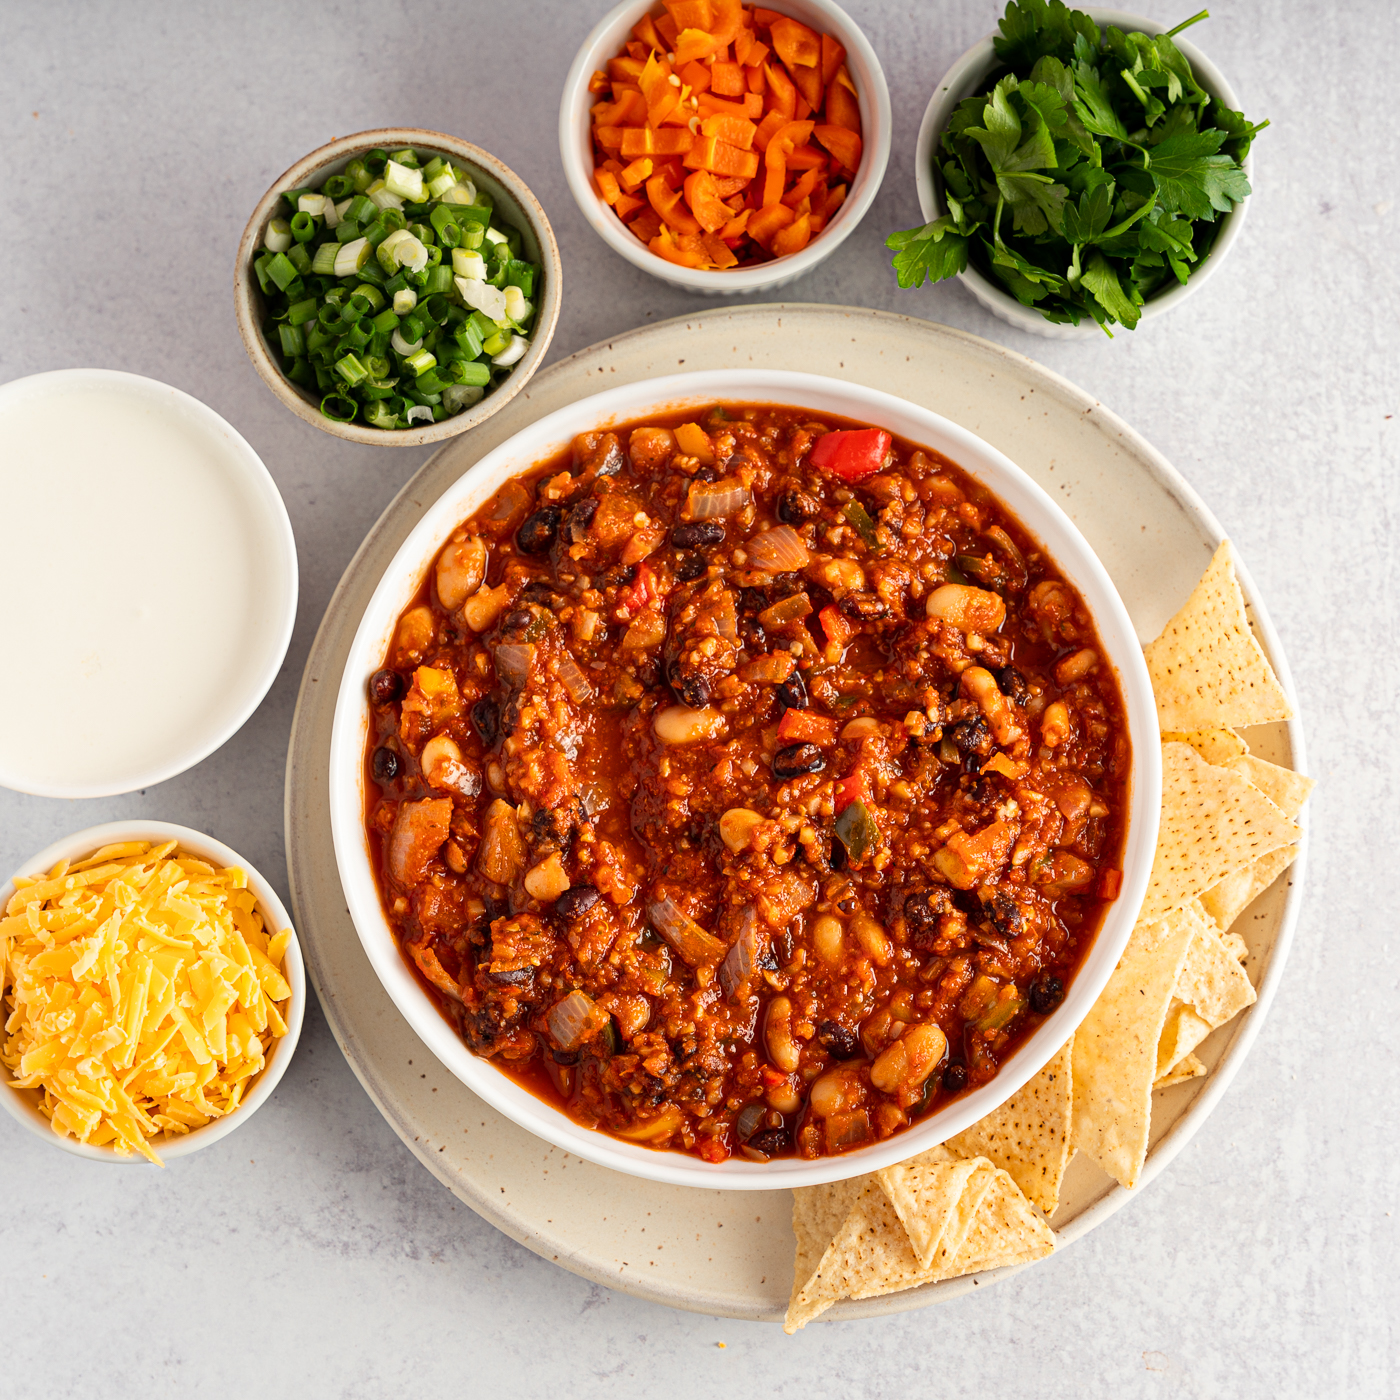 A bowl of vegetable chili on a plate with tortilla chips. Around the bowl are smaller bowls full of garnishes such as cheddar cheese, sour cream, green onion, orange bell pepper, and herbs. 